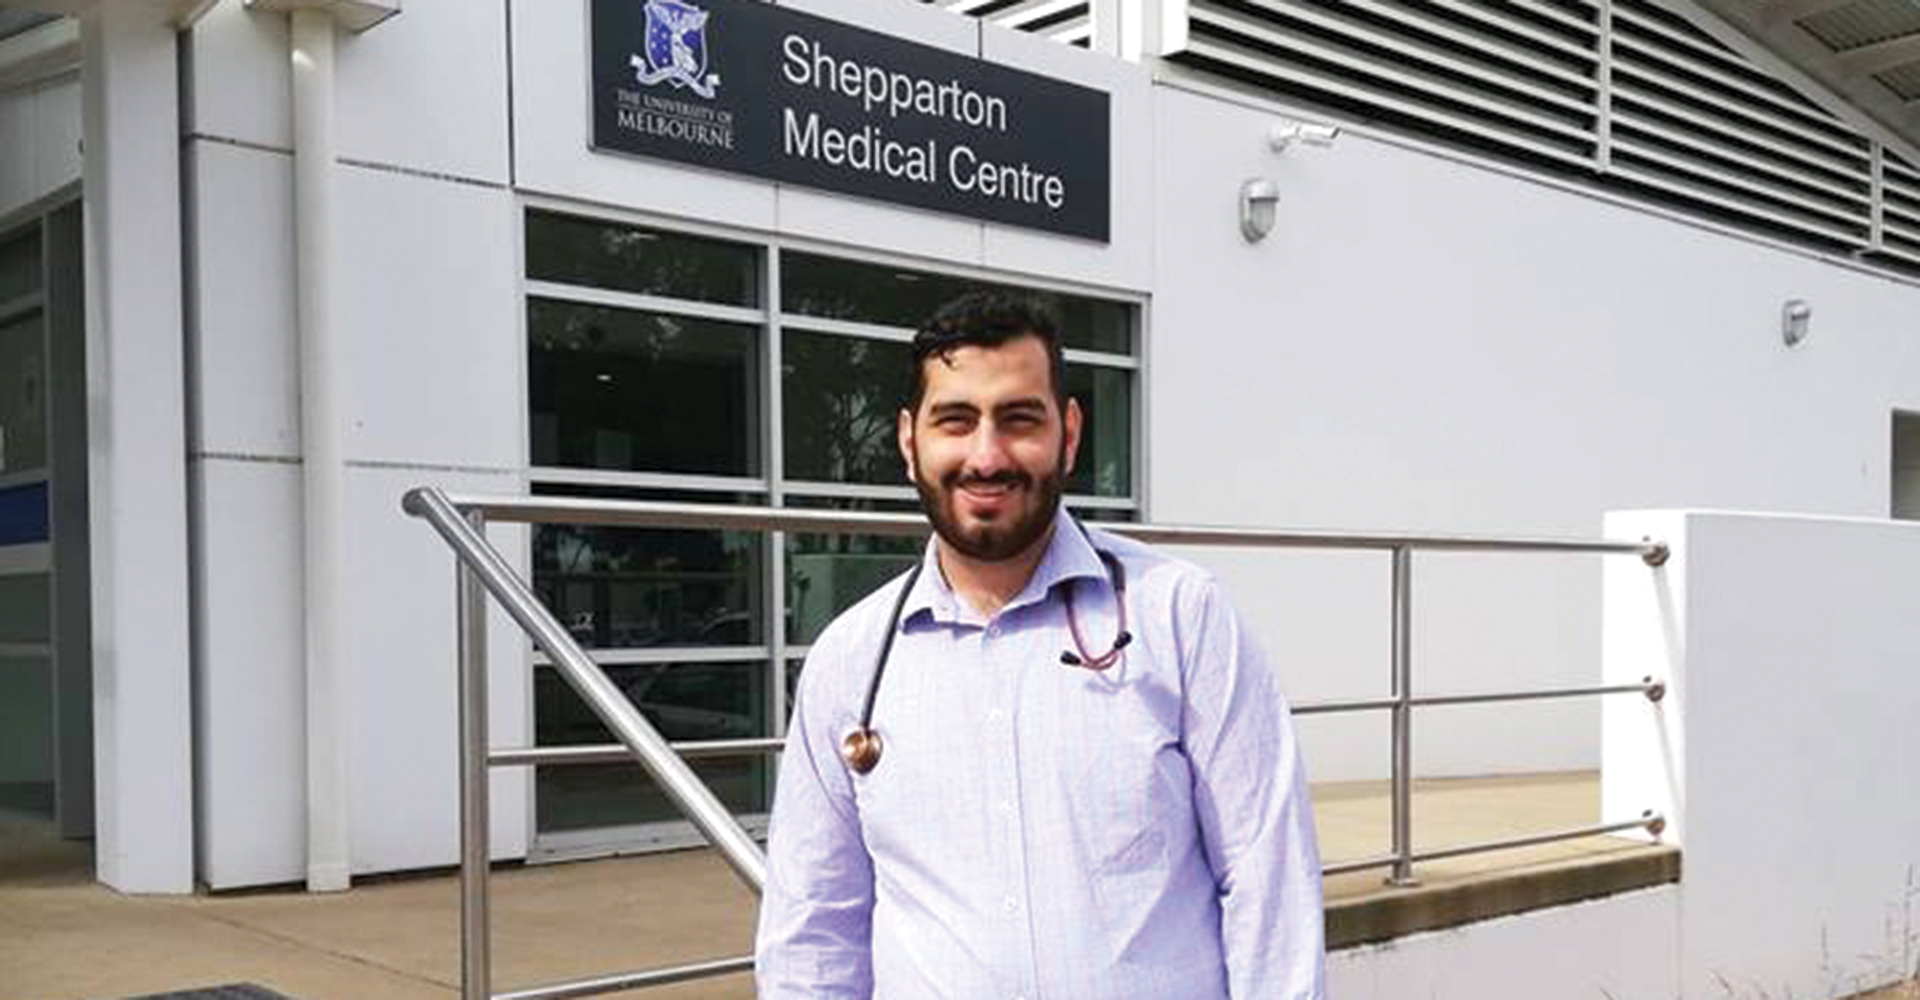 A young rural doctor standing in front of Shepparton Medical Centre.